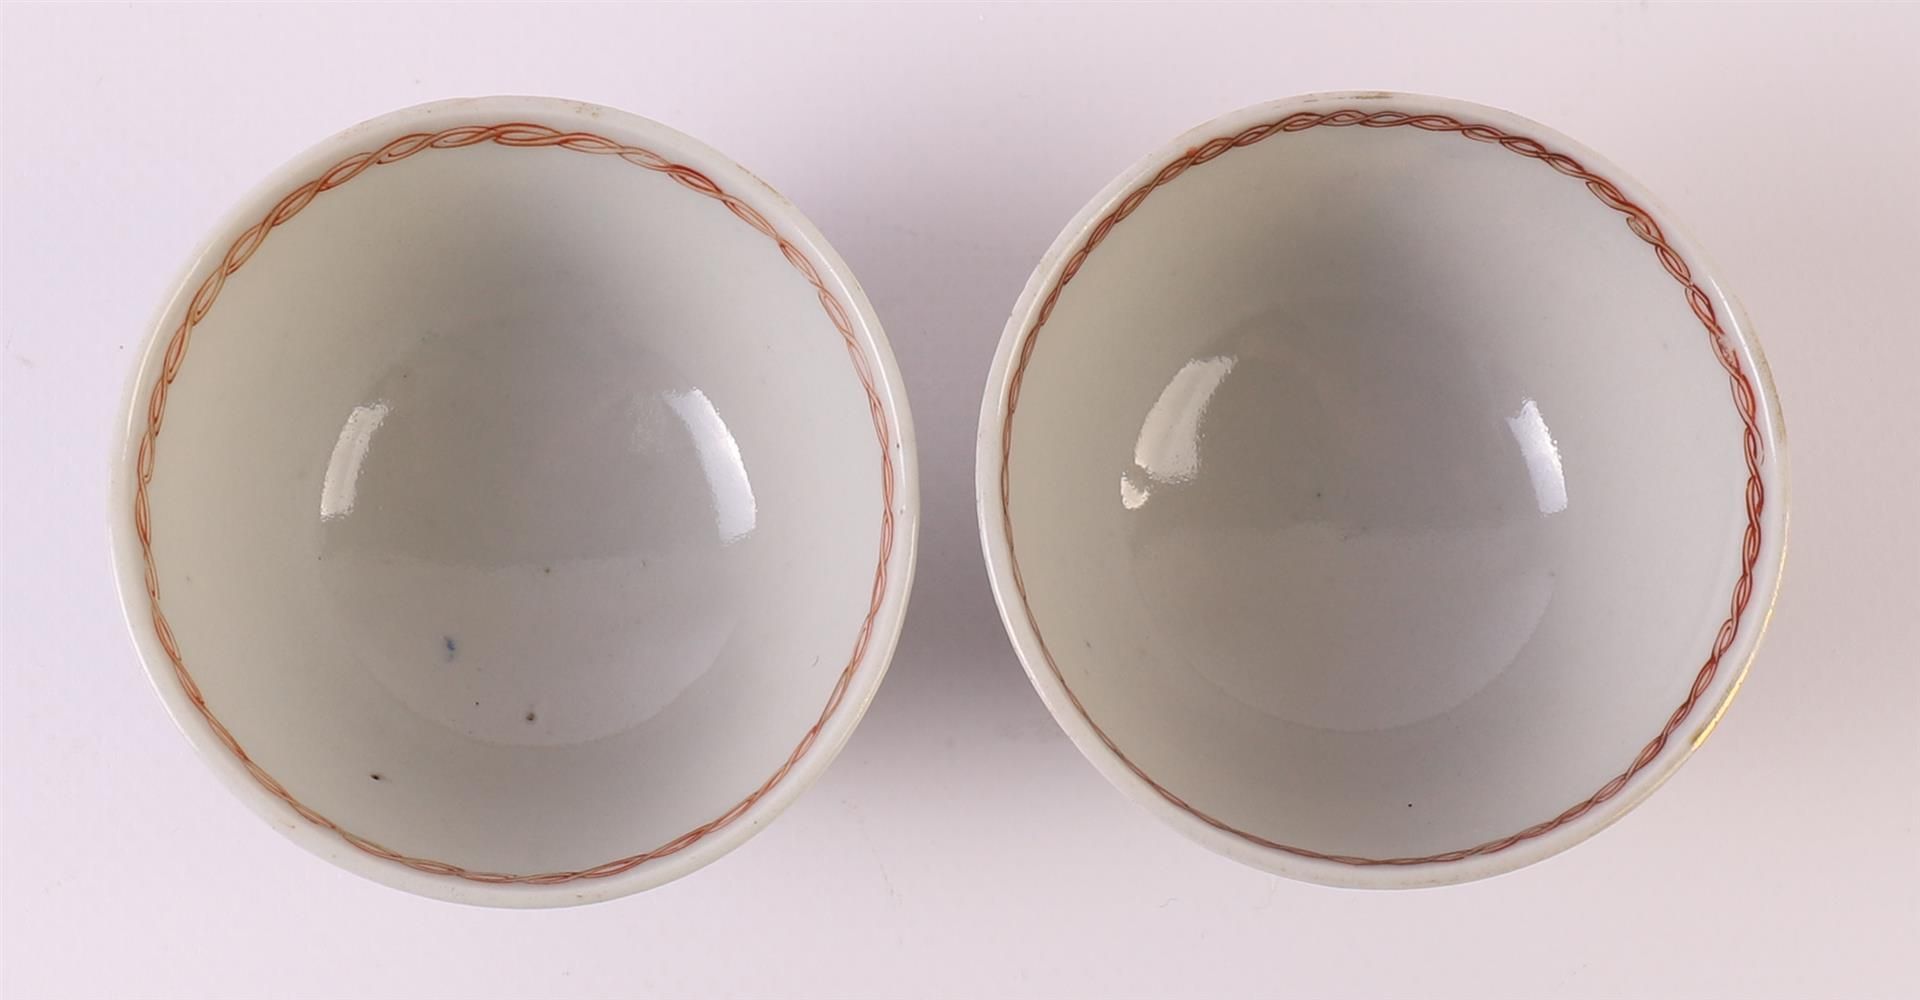 Four porcelain cups and accompanying saucers, Chine de Commande, China, Qianlong, 18th century. - Image 21 of 22